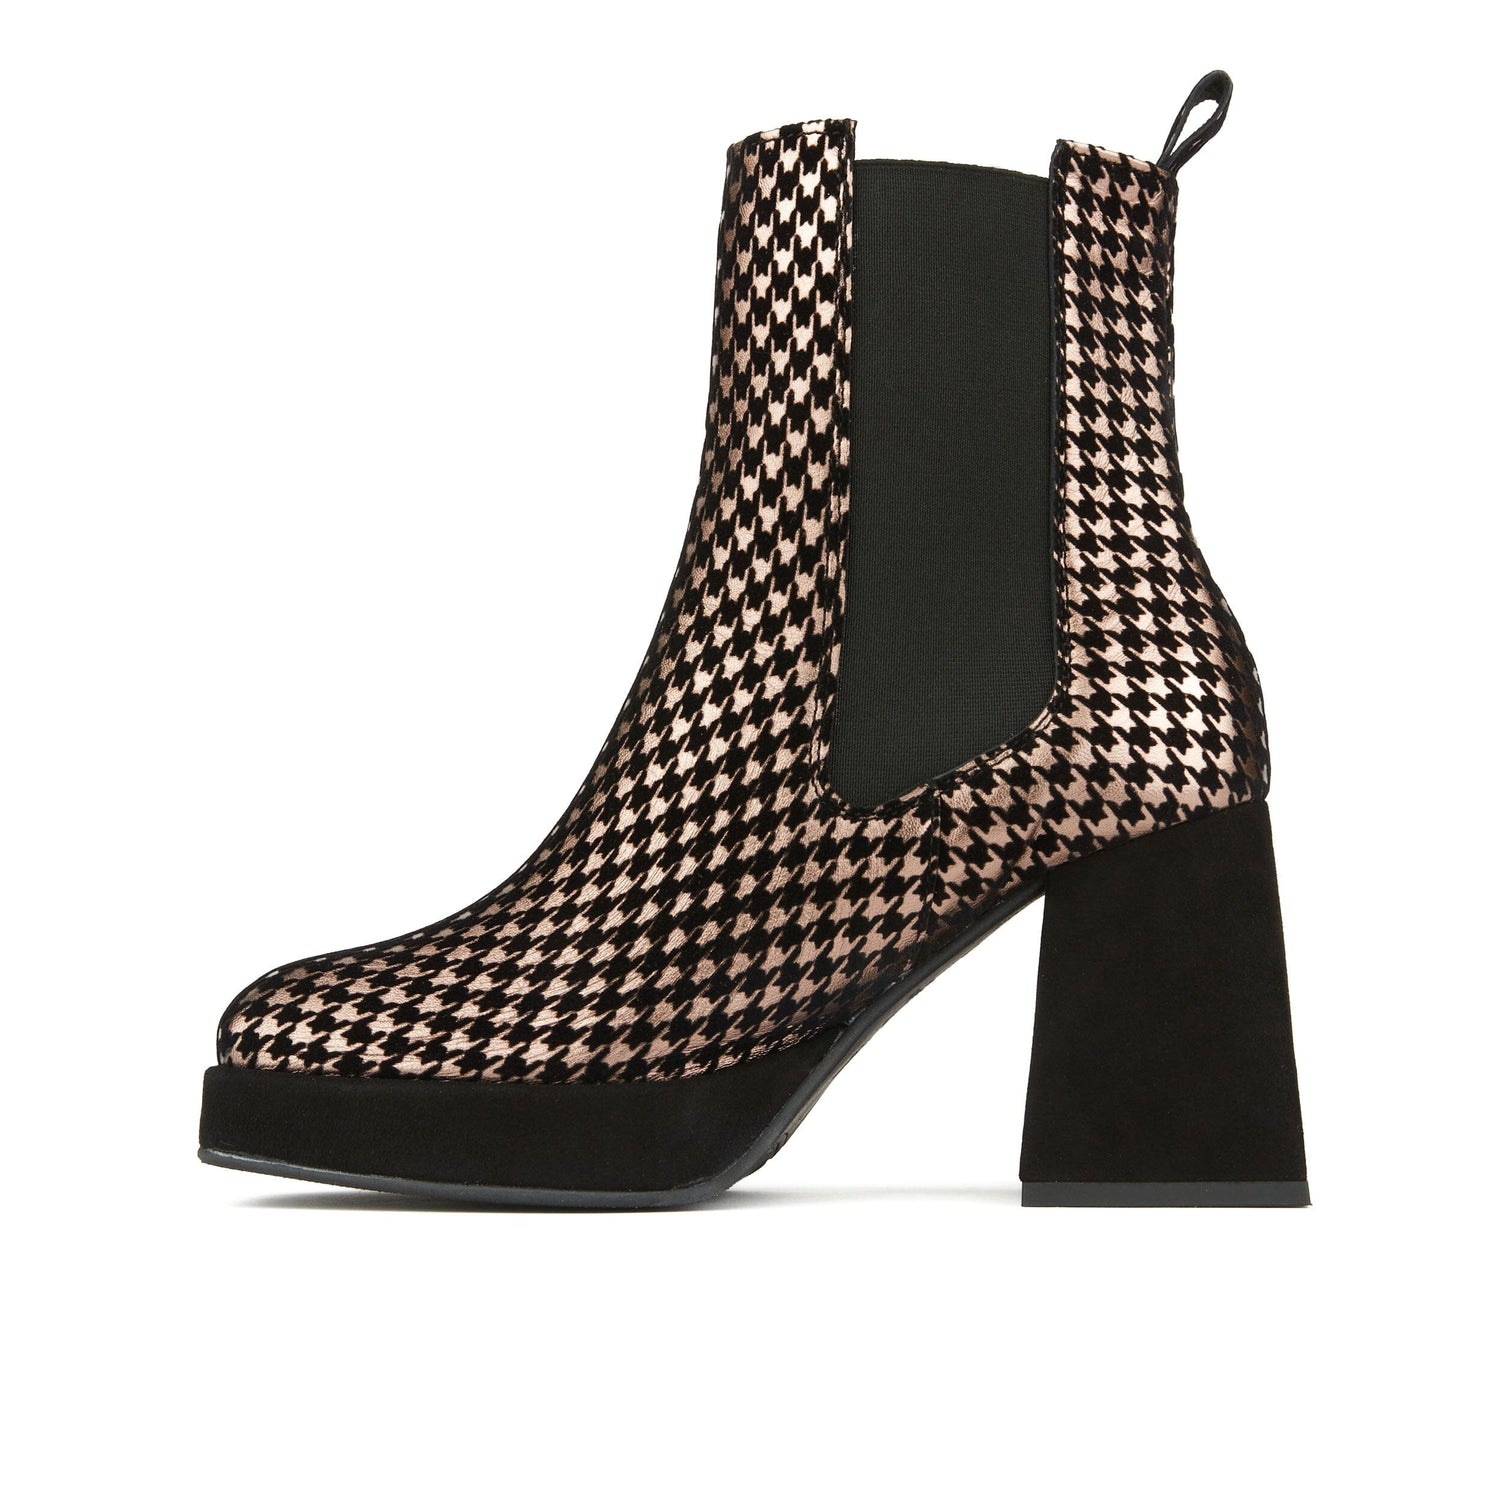 Botanic Boot - Black & Houndstooth Womens Ankle Boots Embassy London 